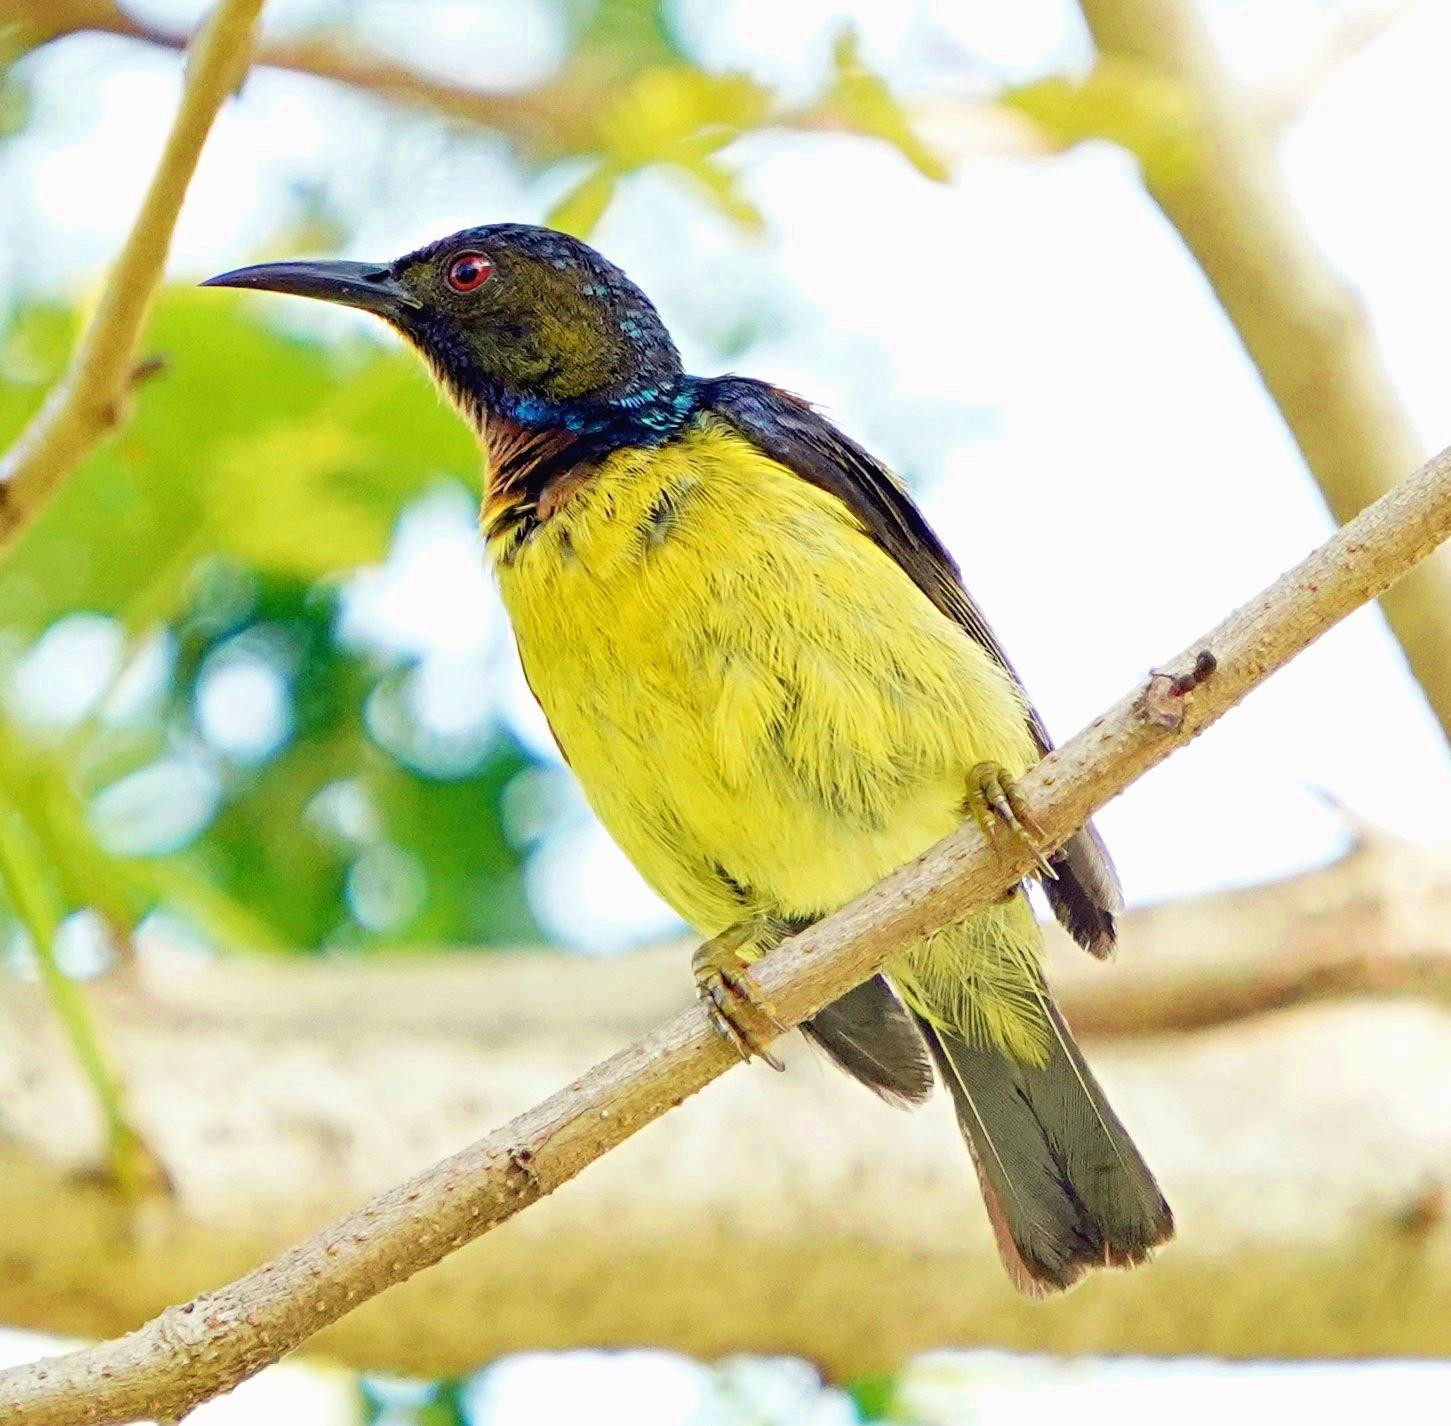 Brown-throated/Gray-throated Sunbird Photo by Steven Cheong